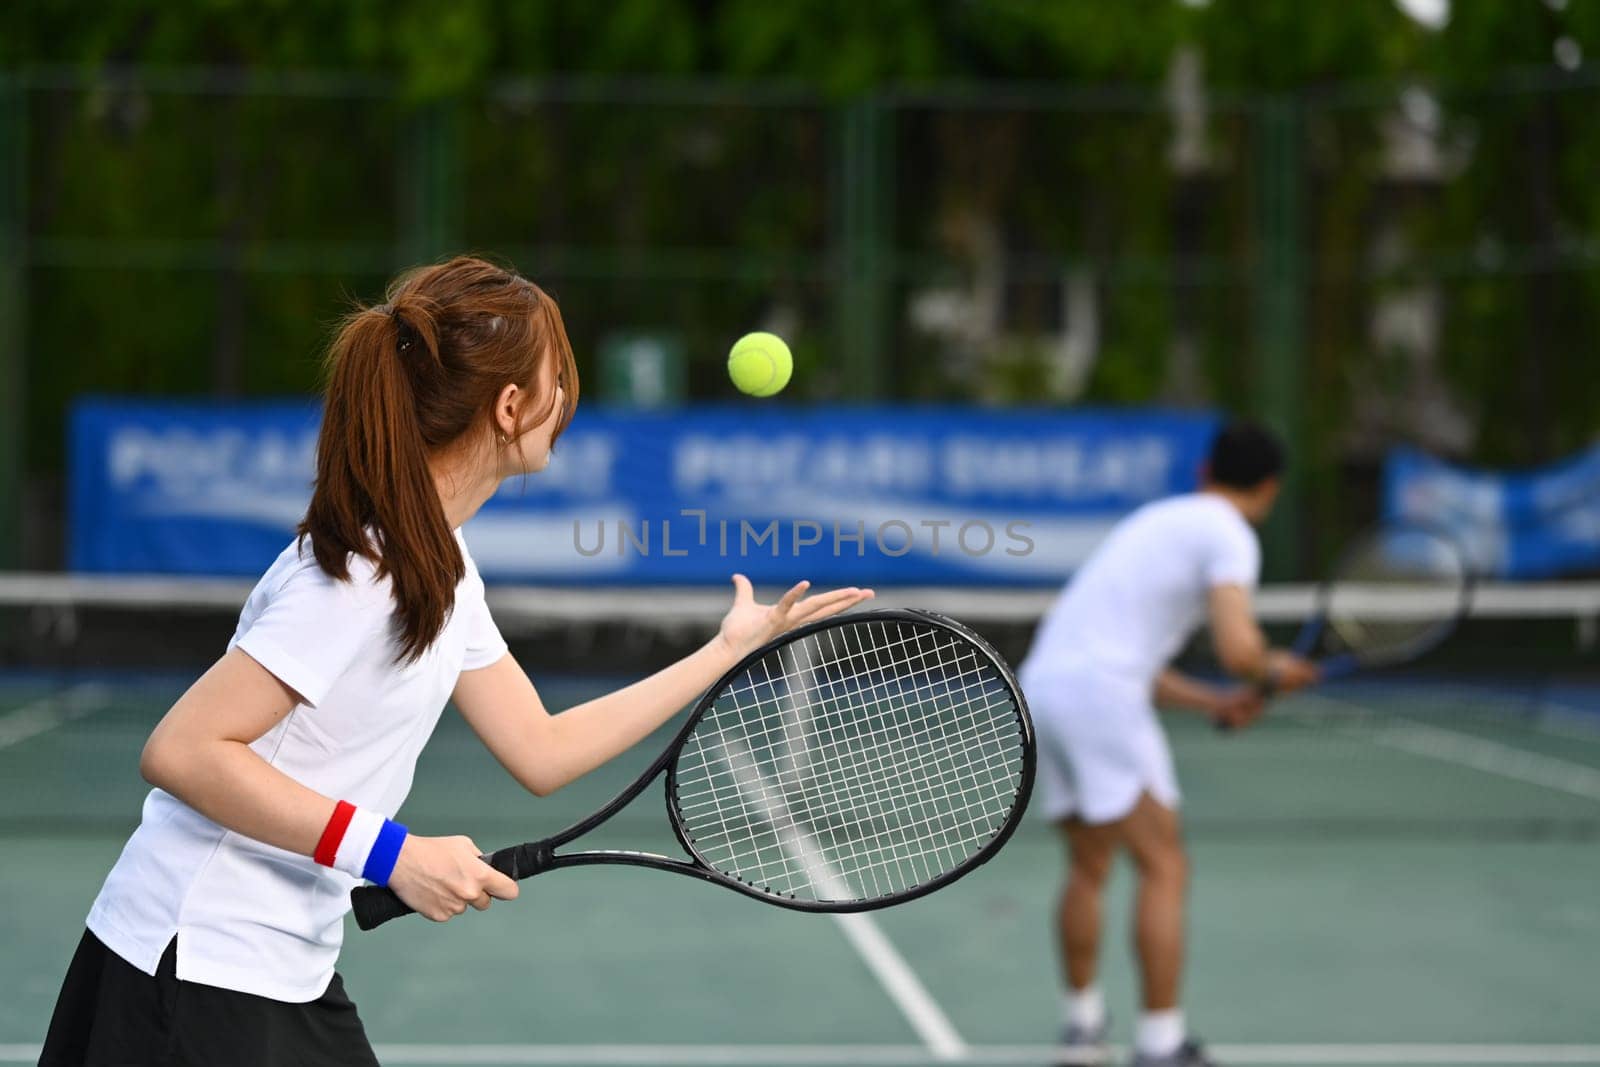 Tennis player serving tennis ball during a match on open court. Sport, fitness, training and active life concept.